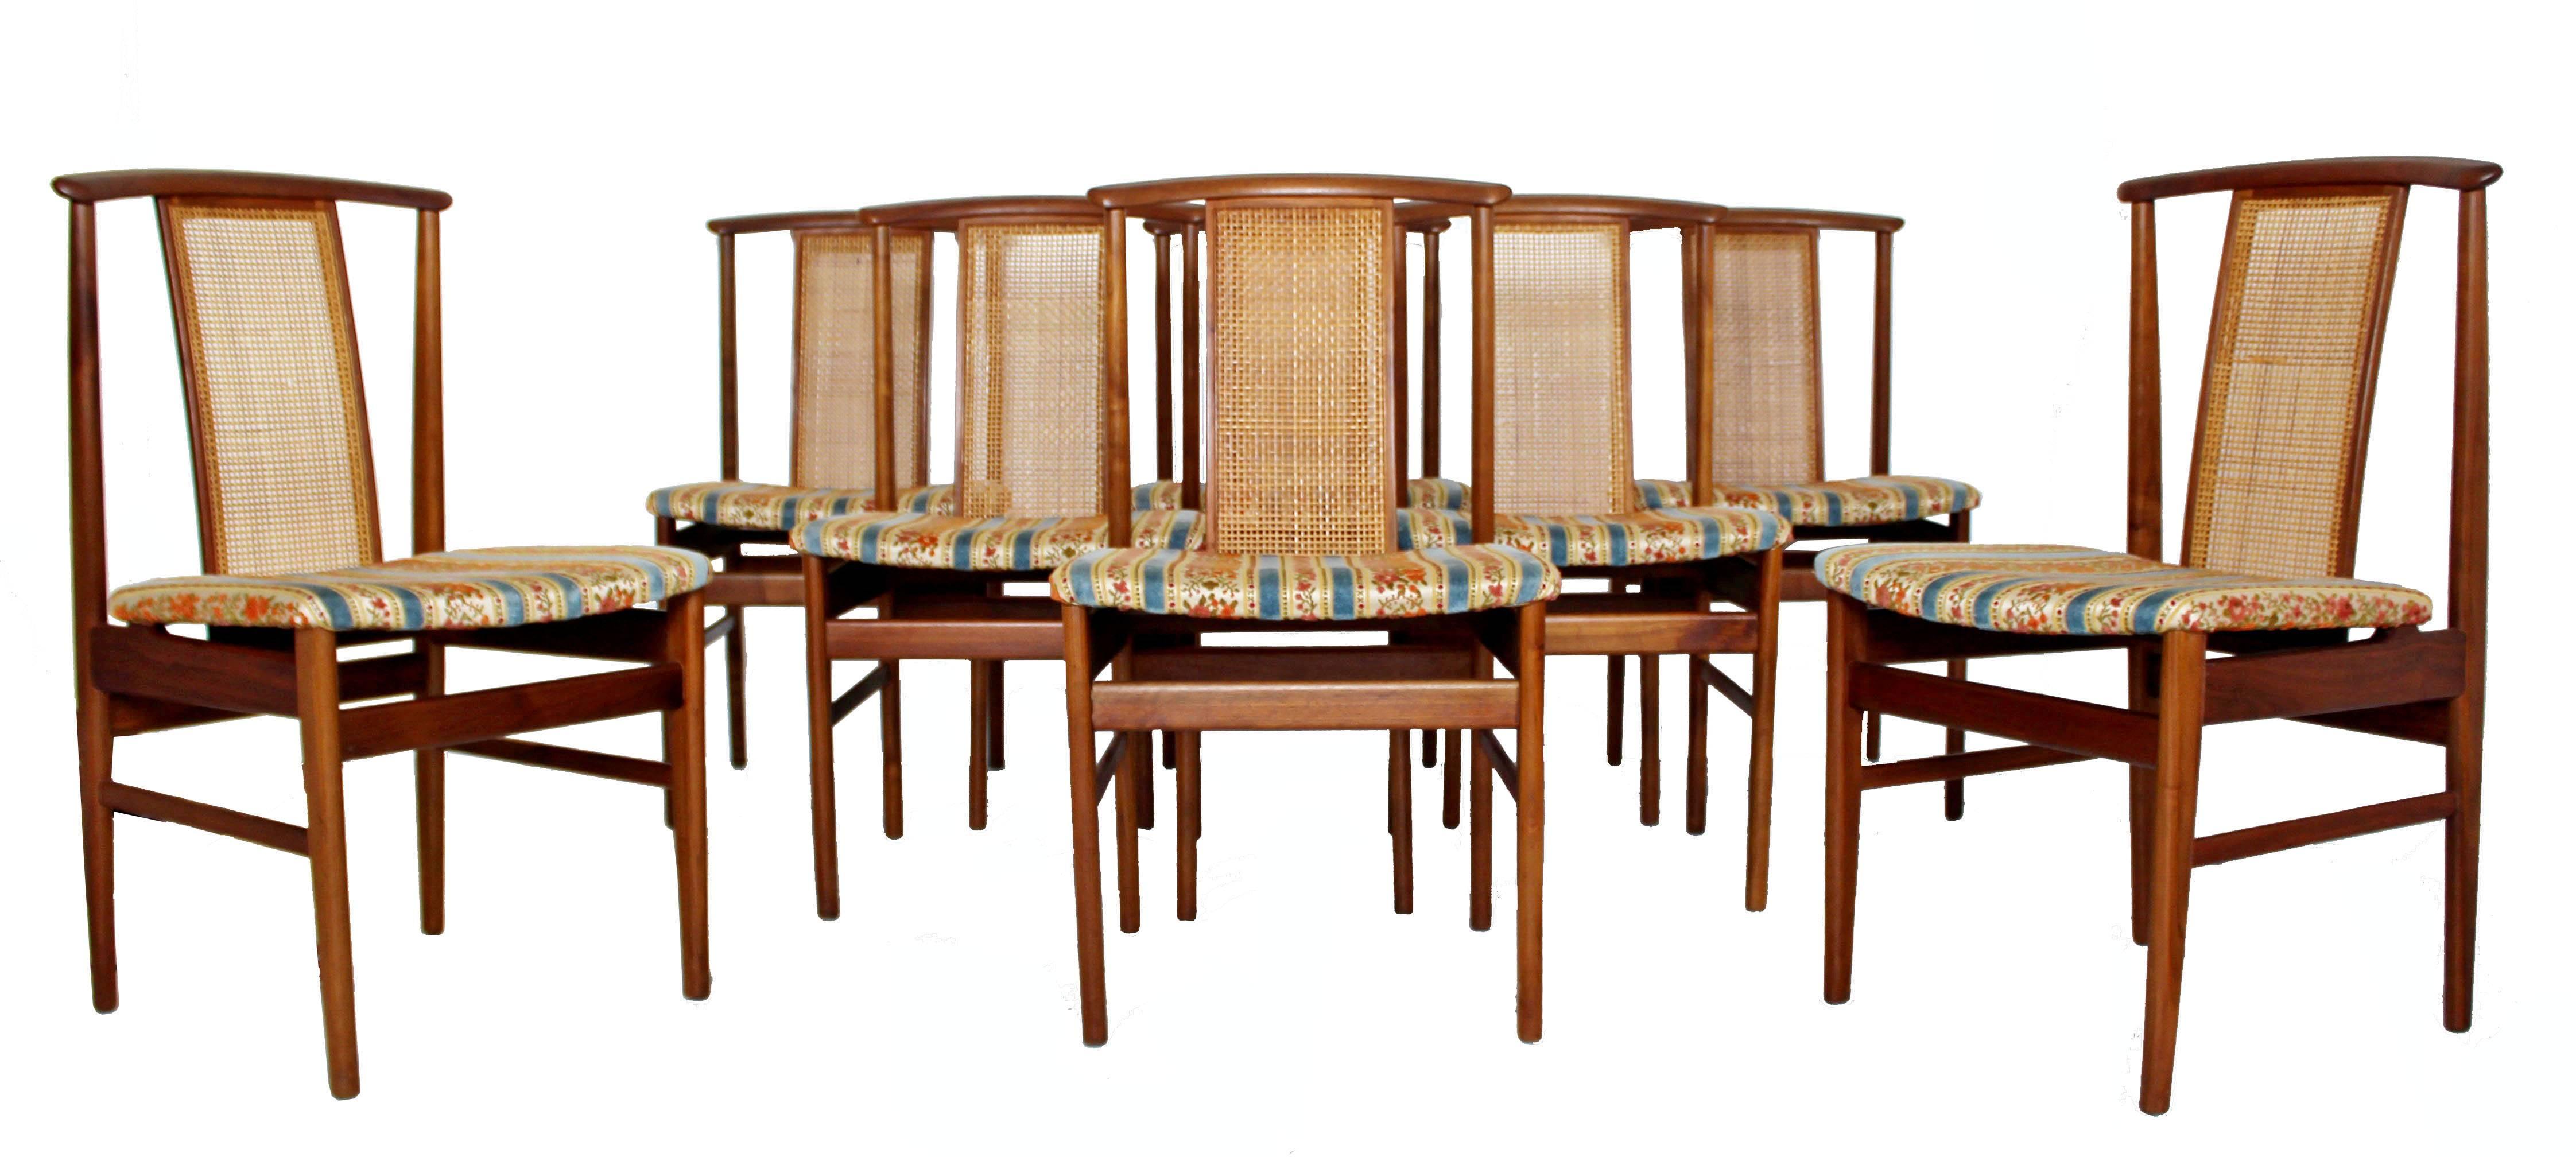 For your consideration is a magnificent, dining set, including eight teak and cane side dining chairs and an expandable table with two leaves, by Folke Olsson for Swedish company DUX, circa the 1960s. In excellent condition. Chairs can be